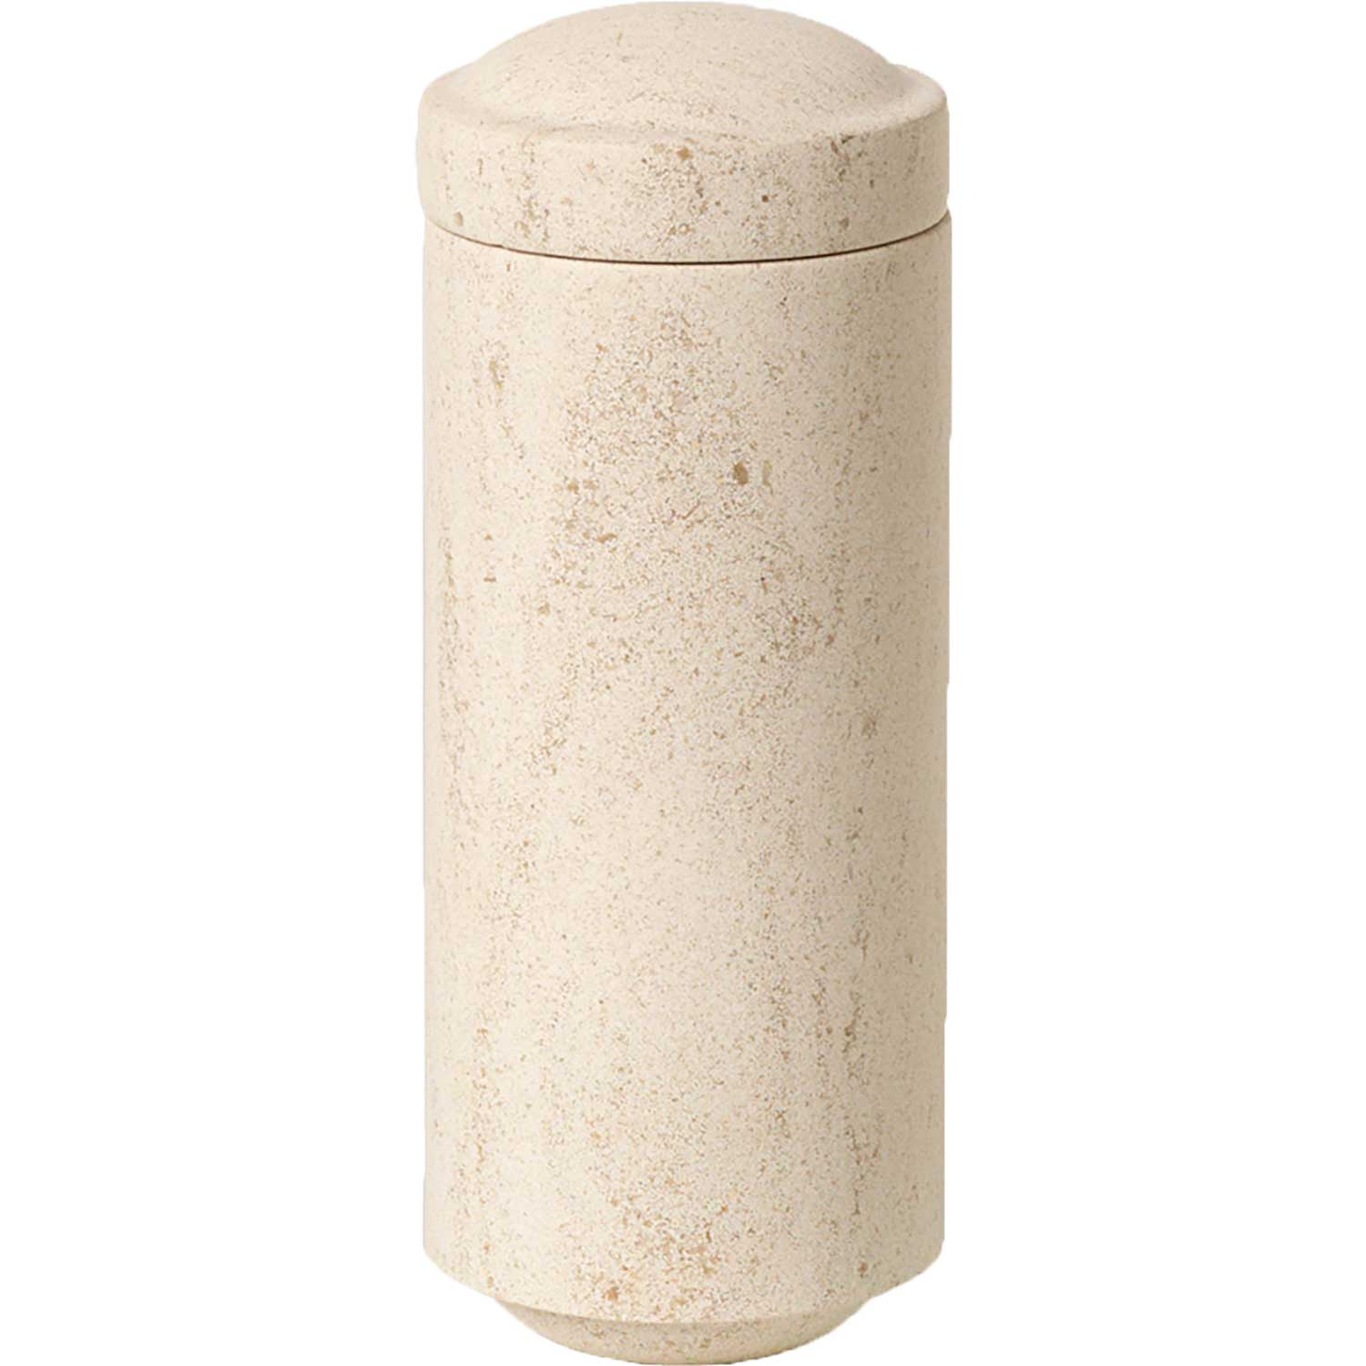 Gallery Objects Burk 18 cm, Lime Stone